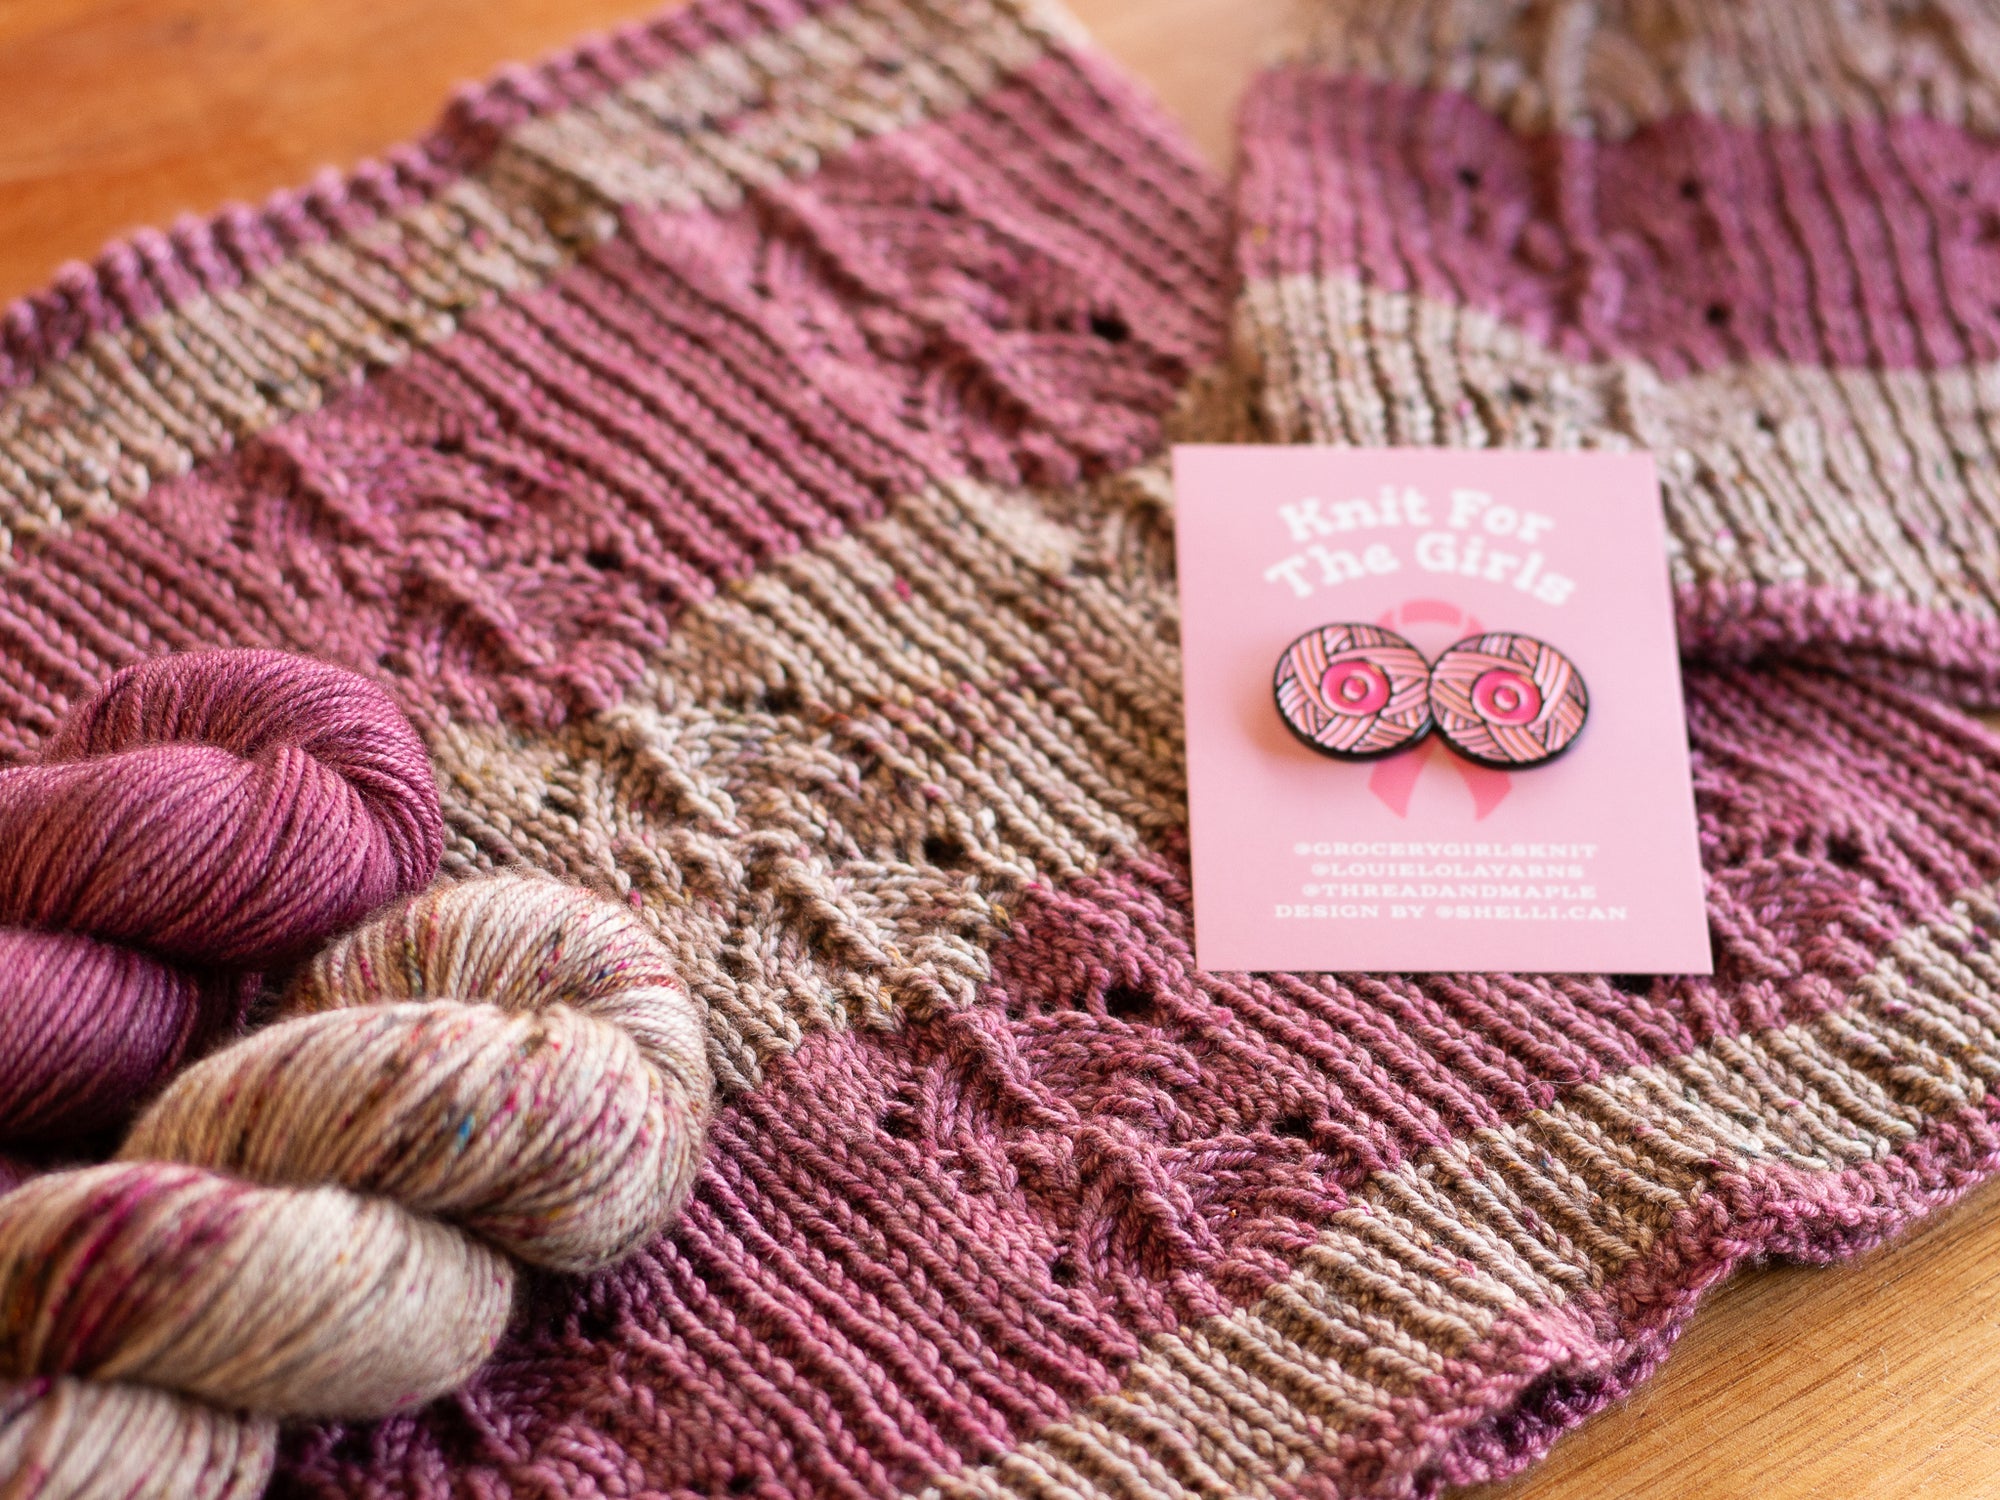 Knit for the Girls - Breast Cancer Fundraiser 2023